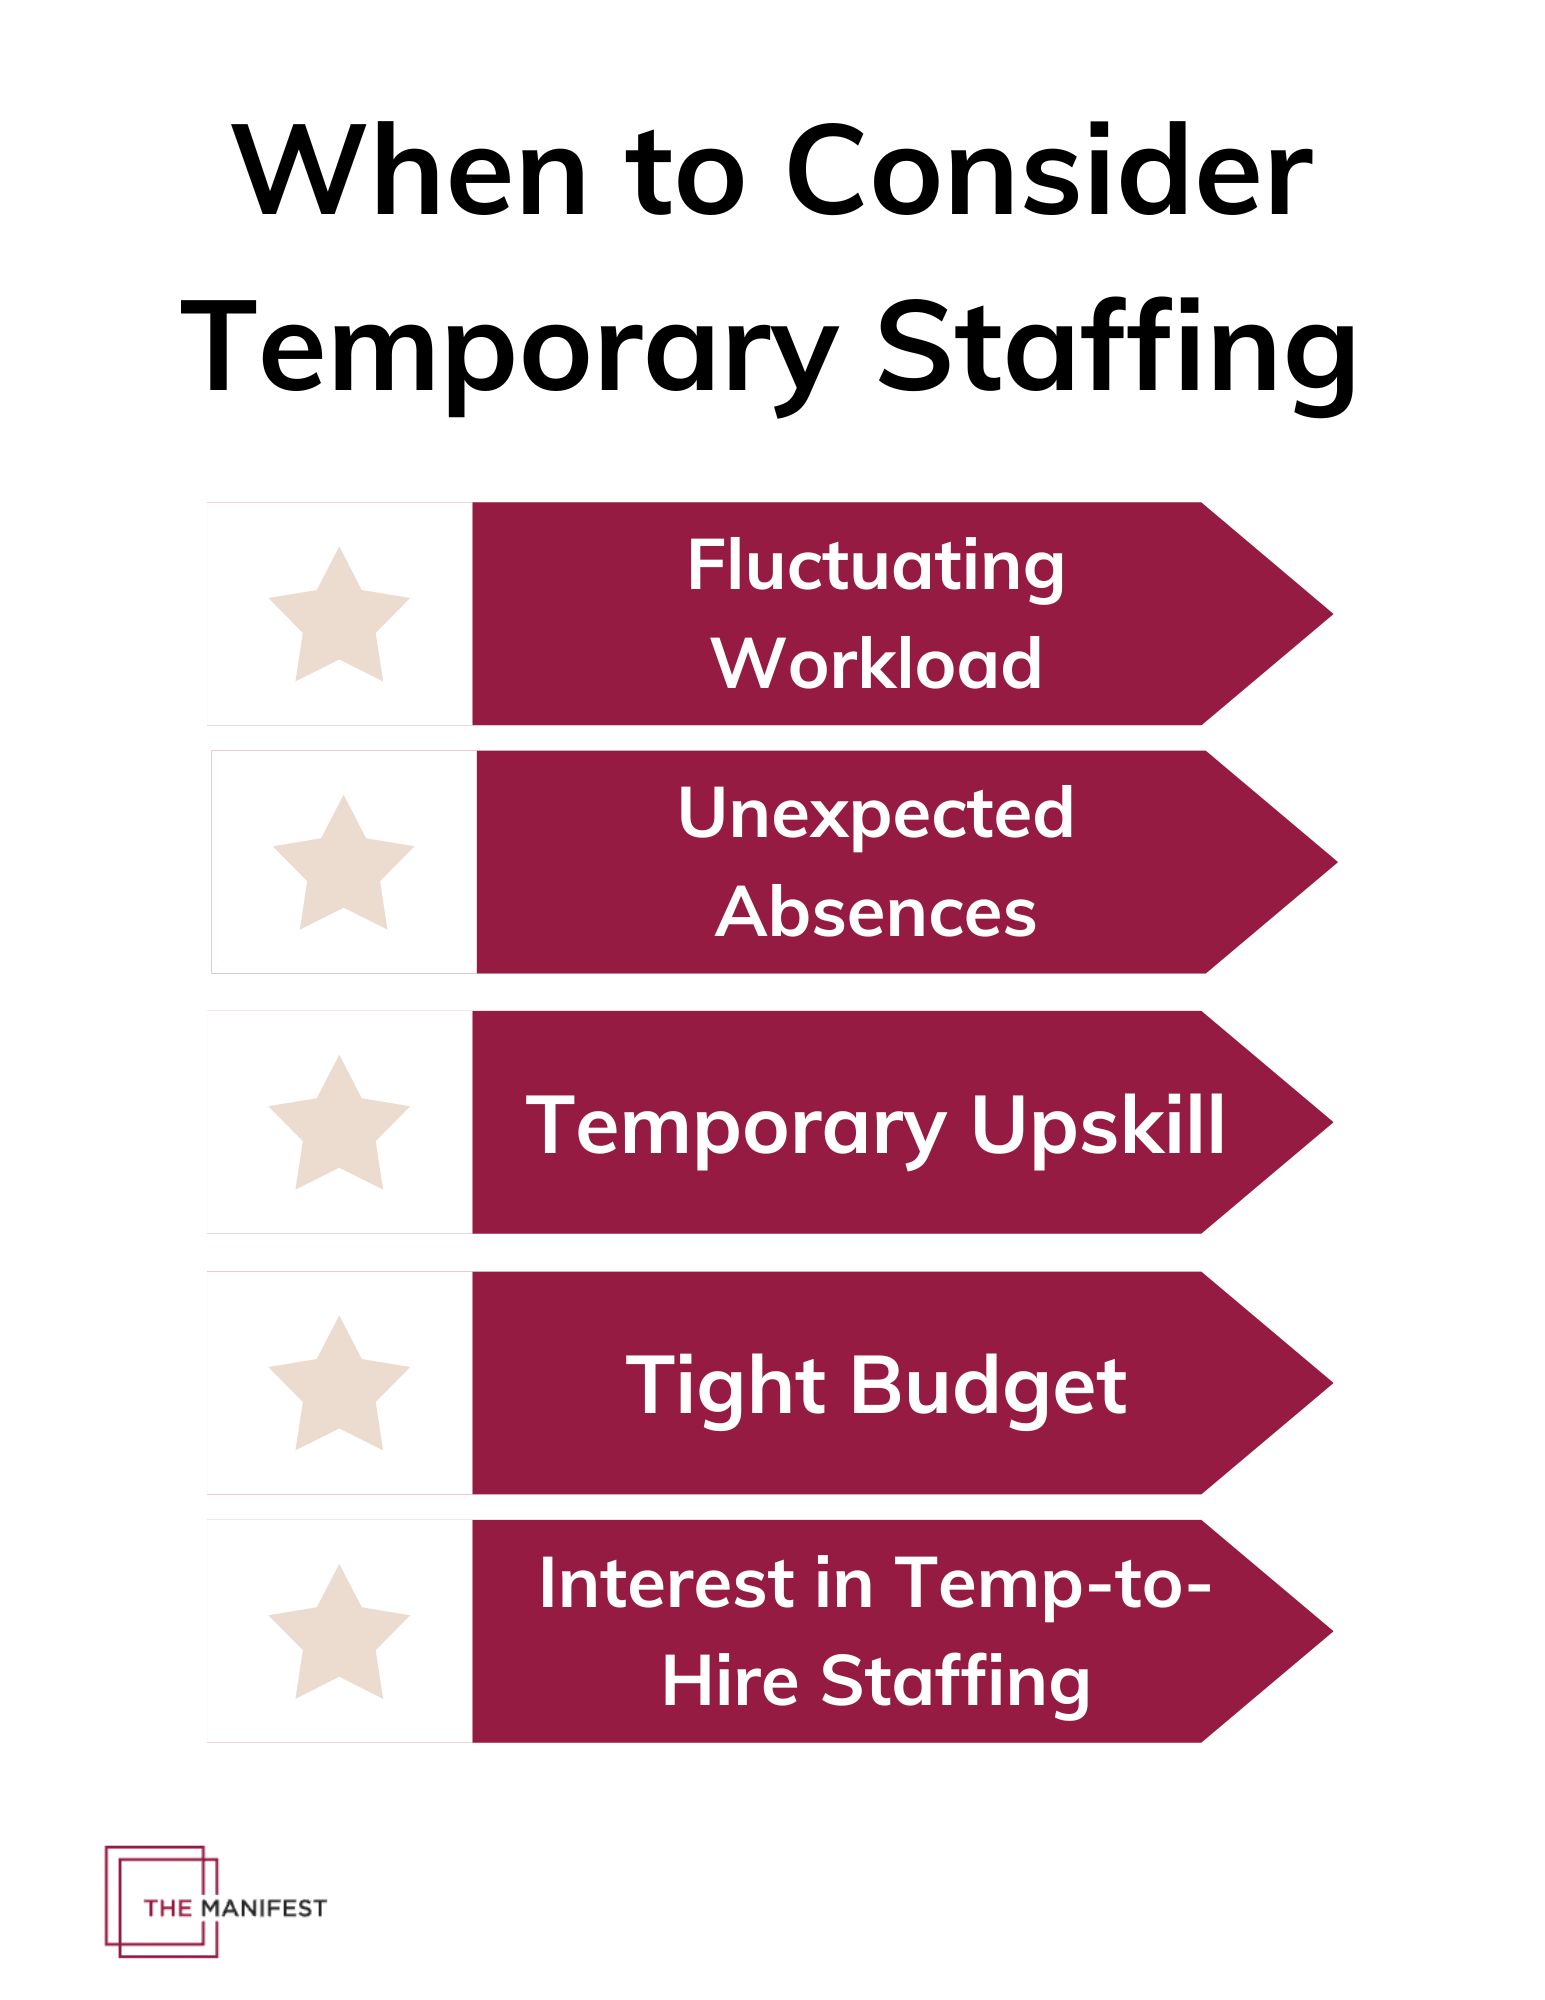 When to Consider Temporary Staffing Services Checklist